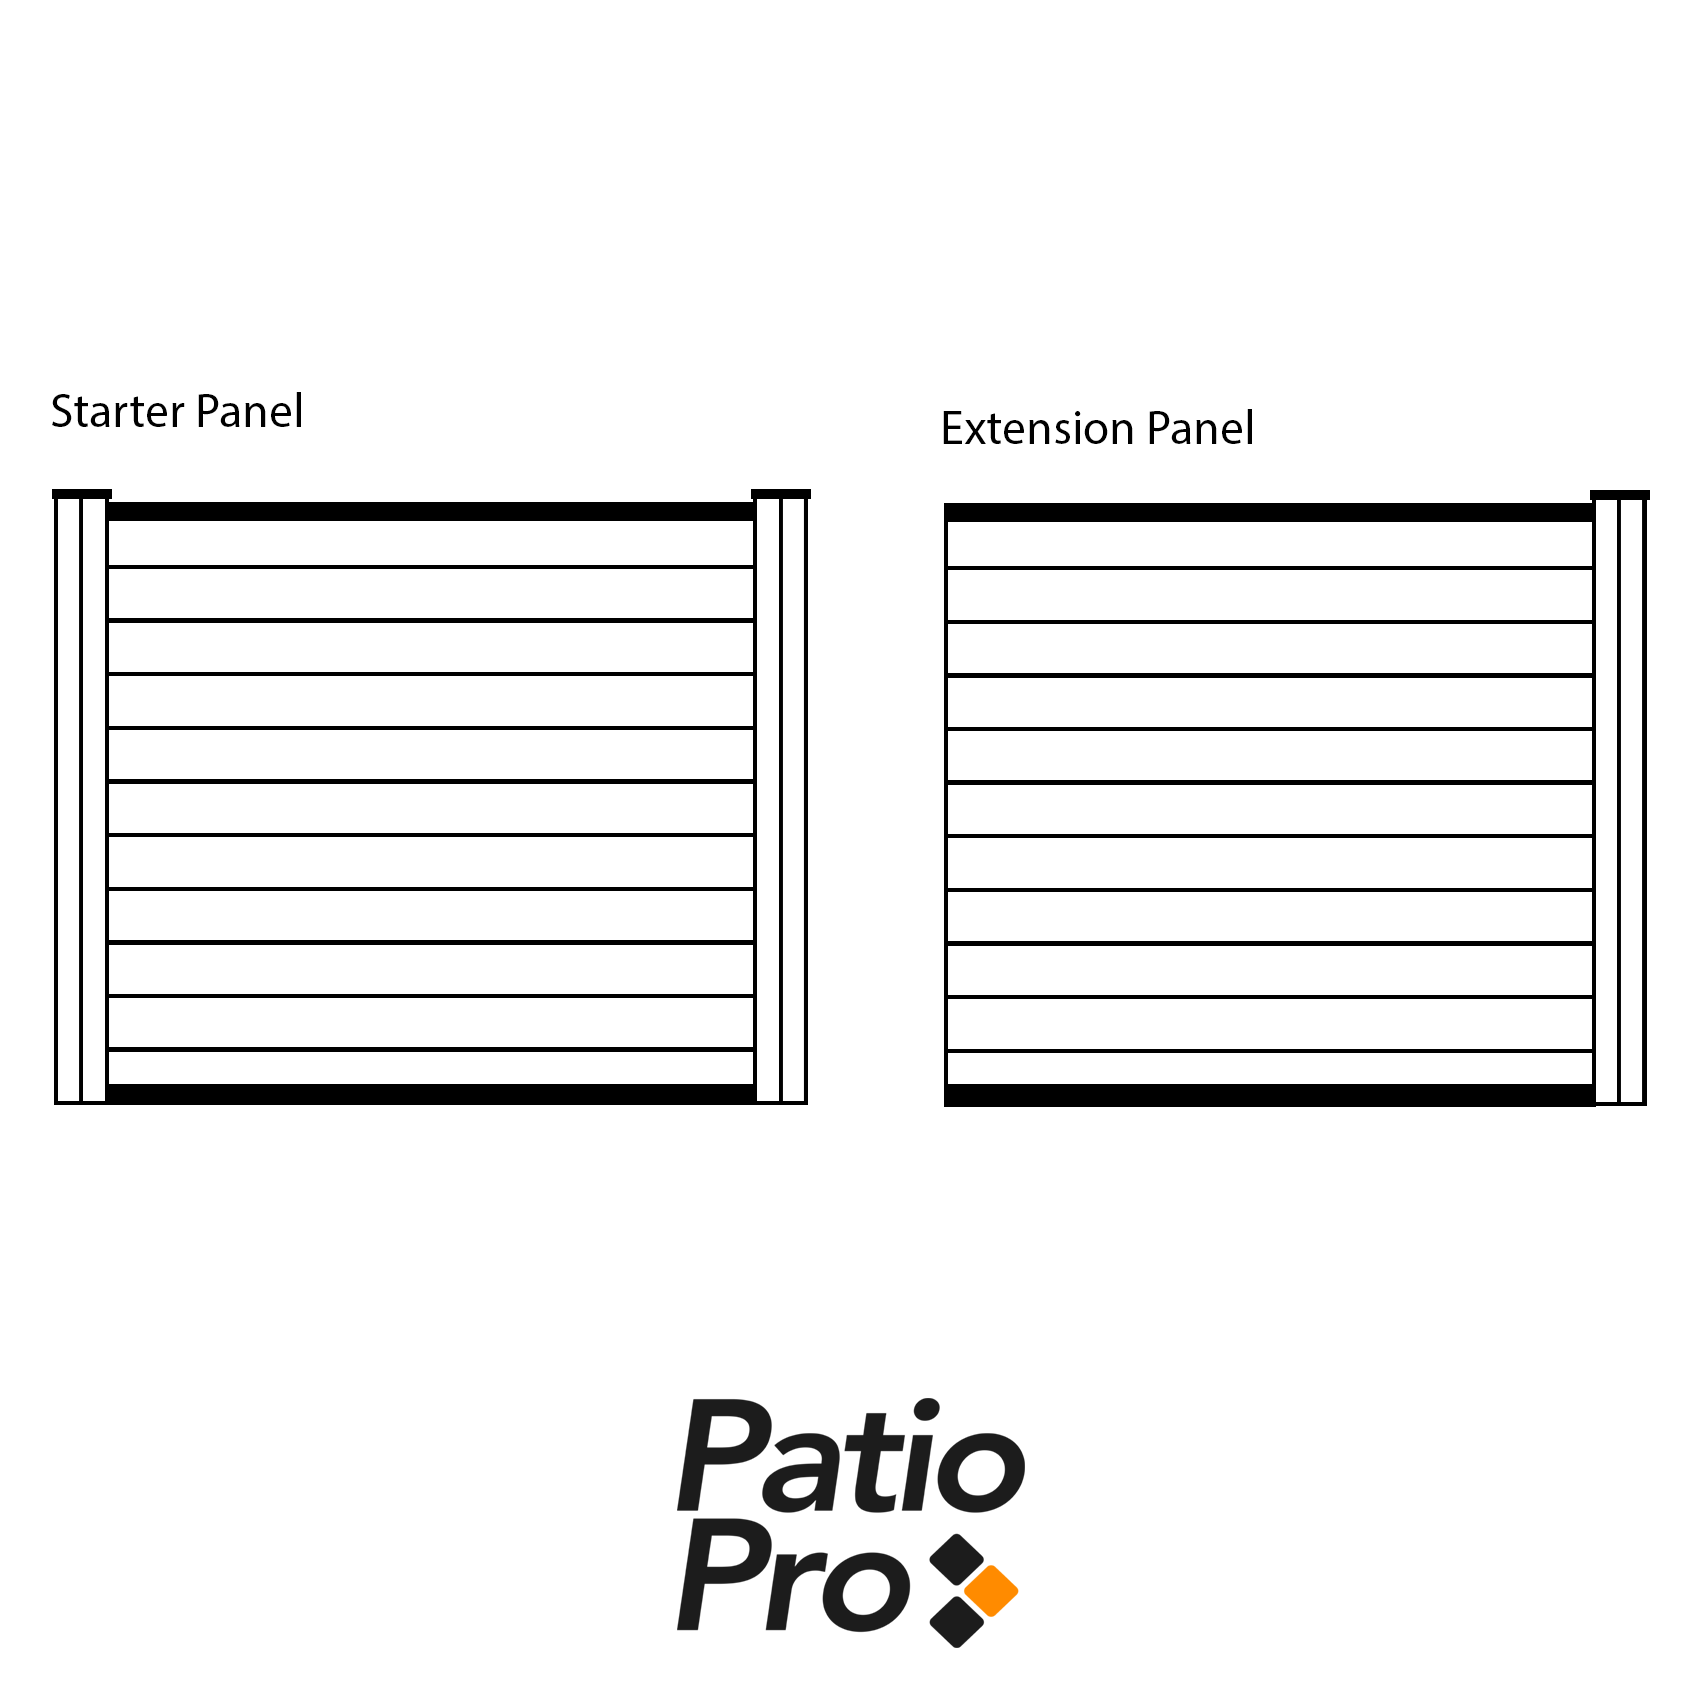 Patio Pro composite fence panel stater panel and extension panel diagram